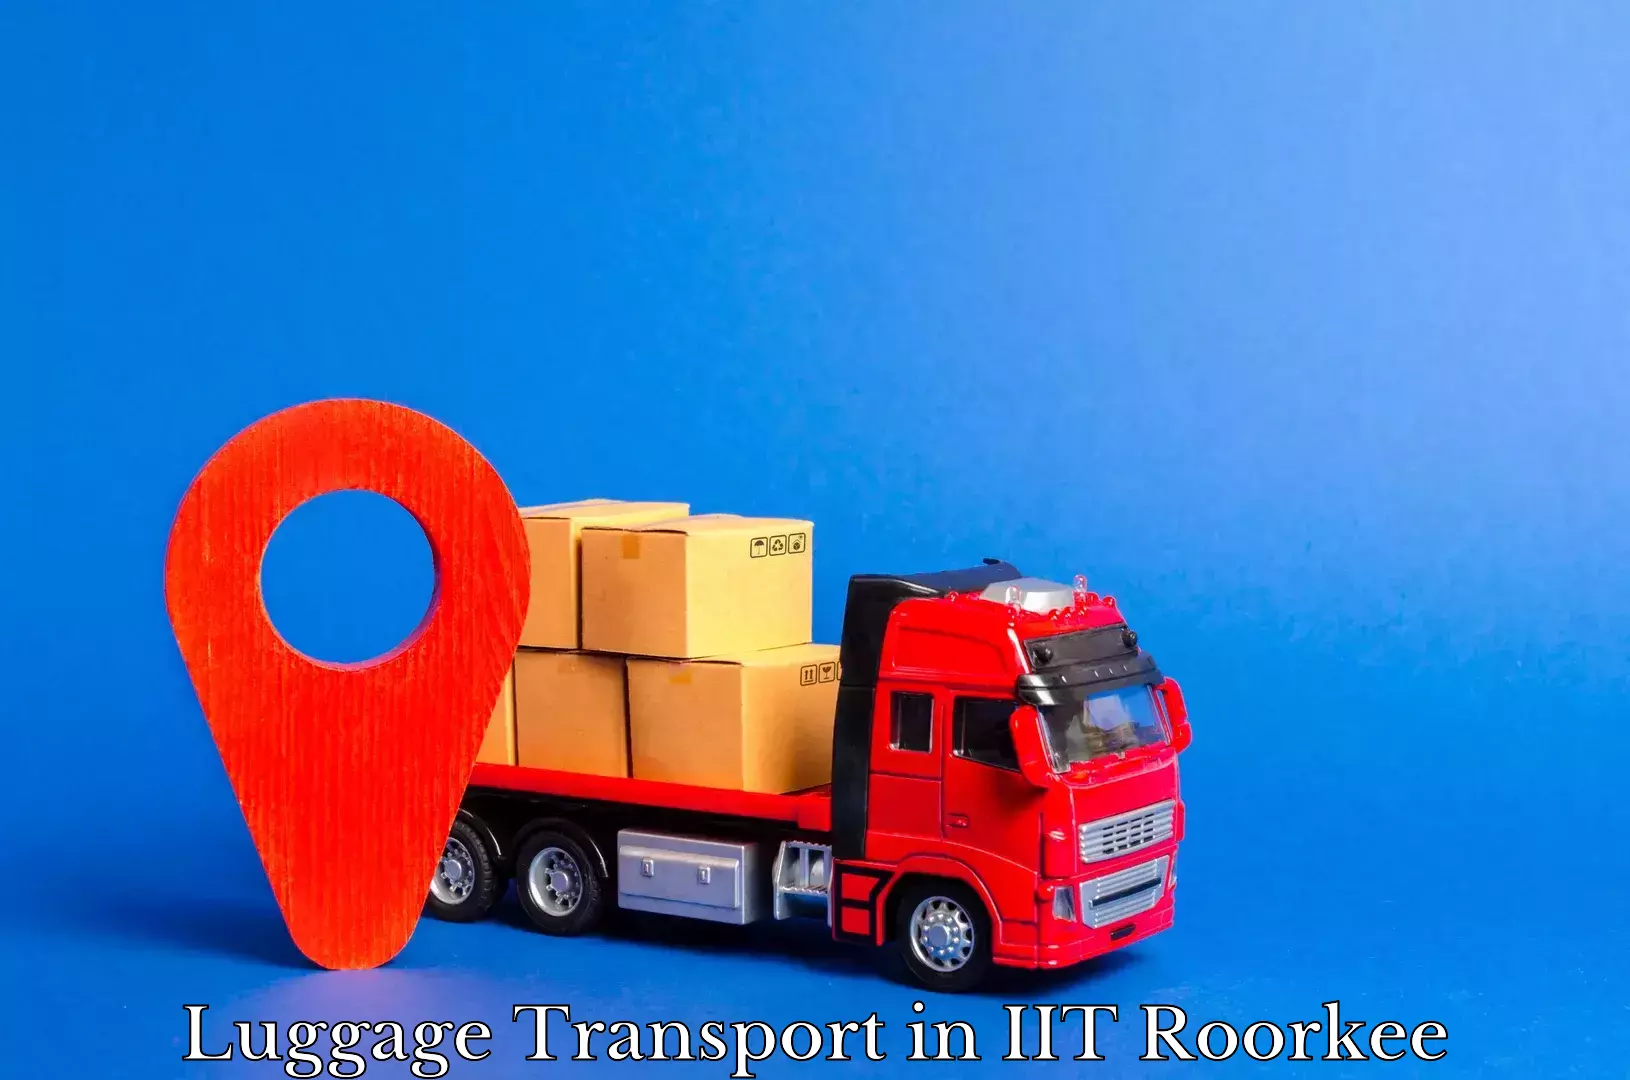 Luggage transport operations in IIT Roorkee